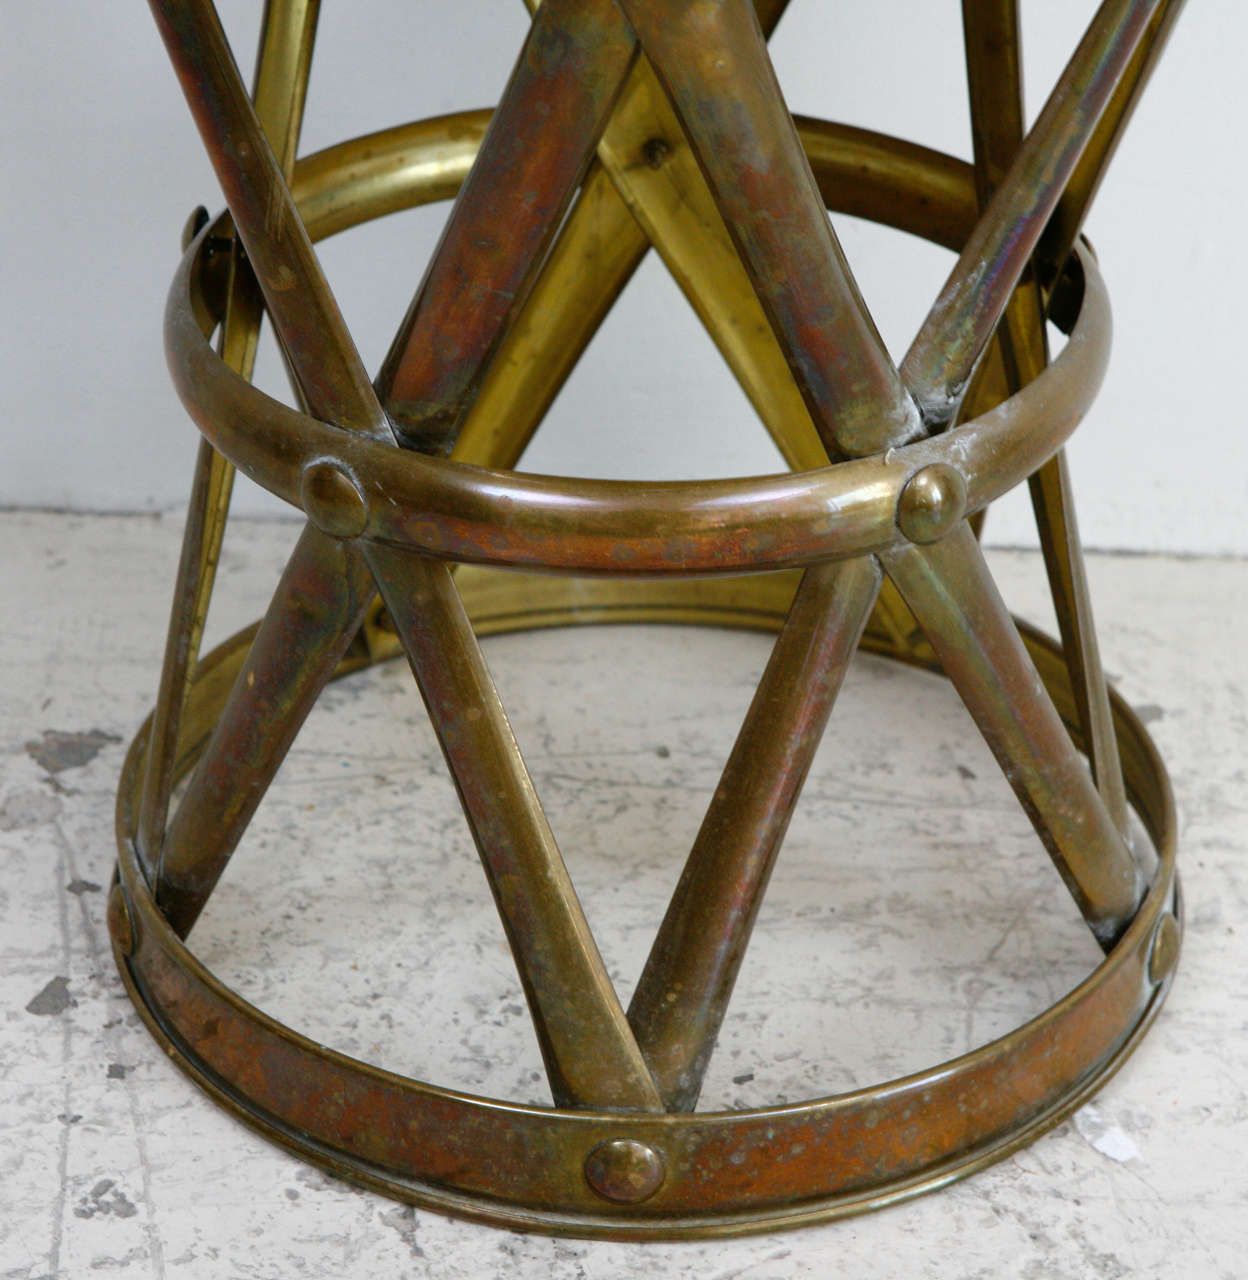 Vintage Brass Drum Stool At 1stdibs Within Newest Espresso Antique Brass Stools (View 9 of 10)